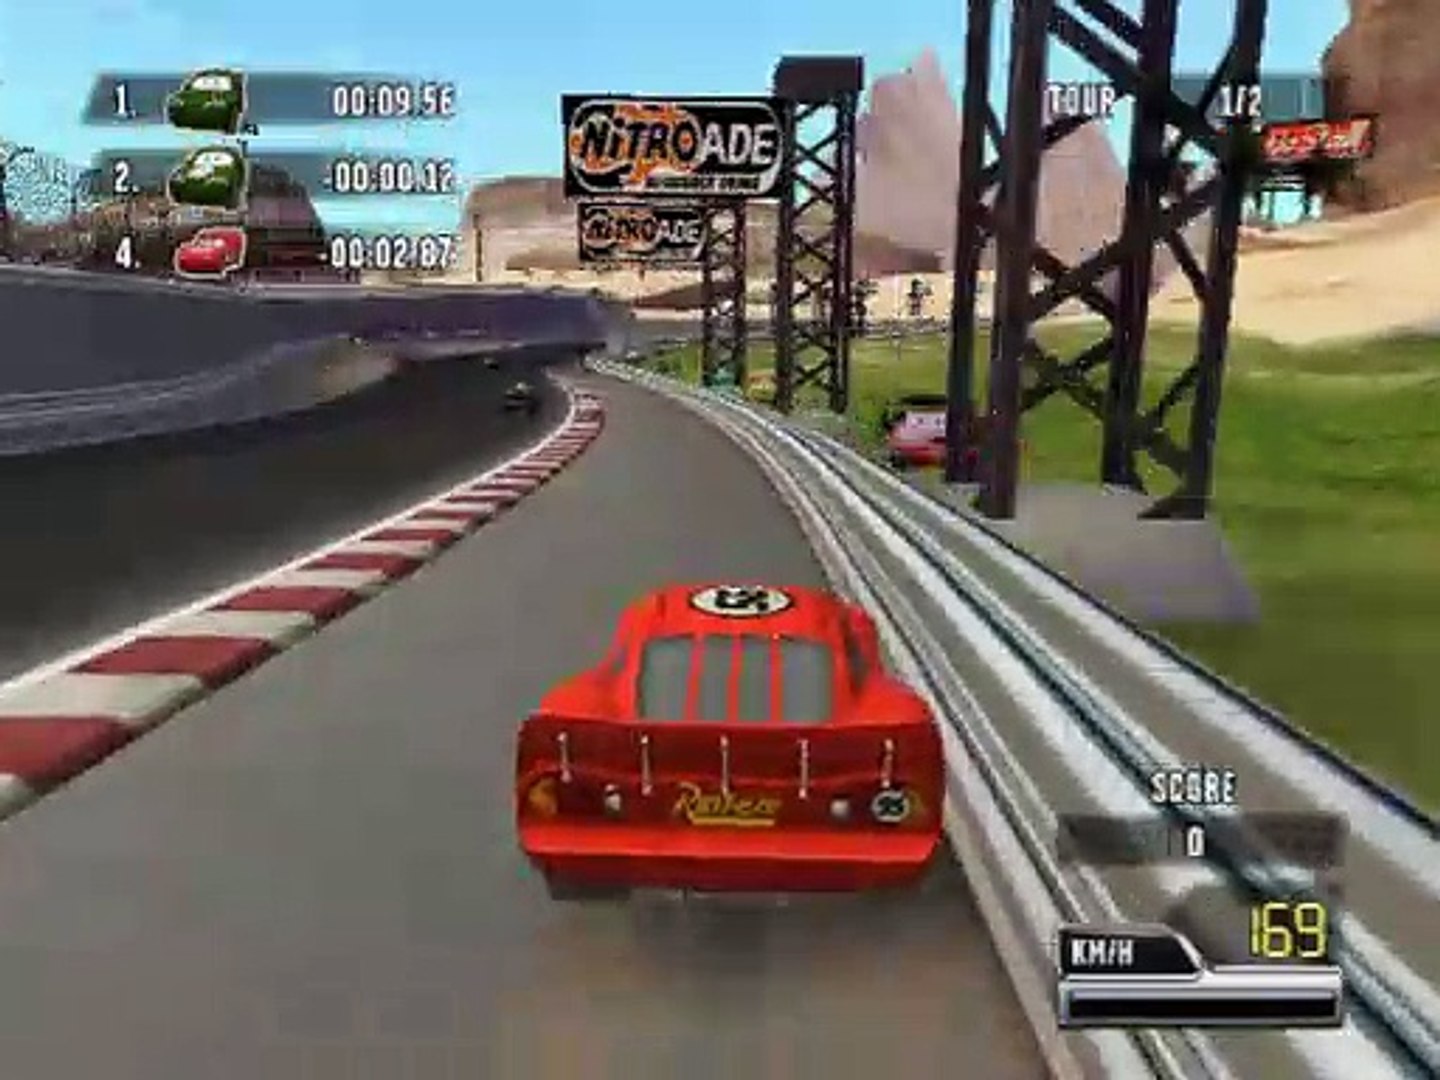 Cars Race-O-Rama online multiplayer - ps2 - Vidéo Dailymotion